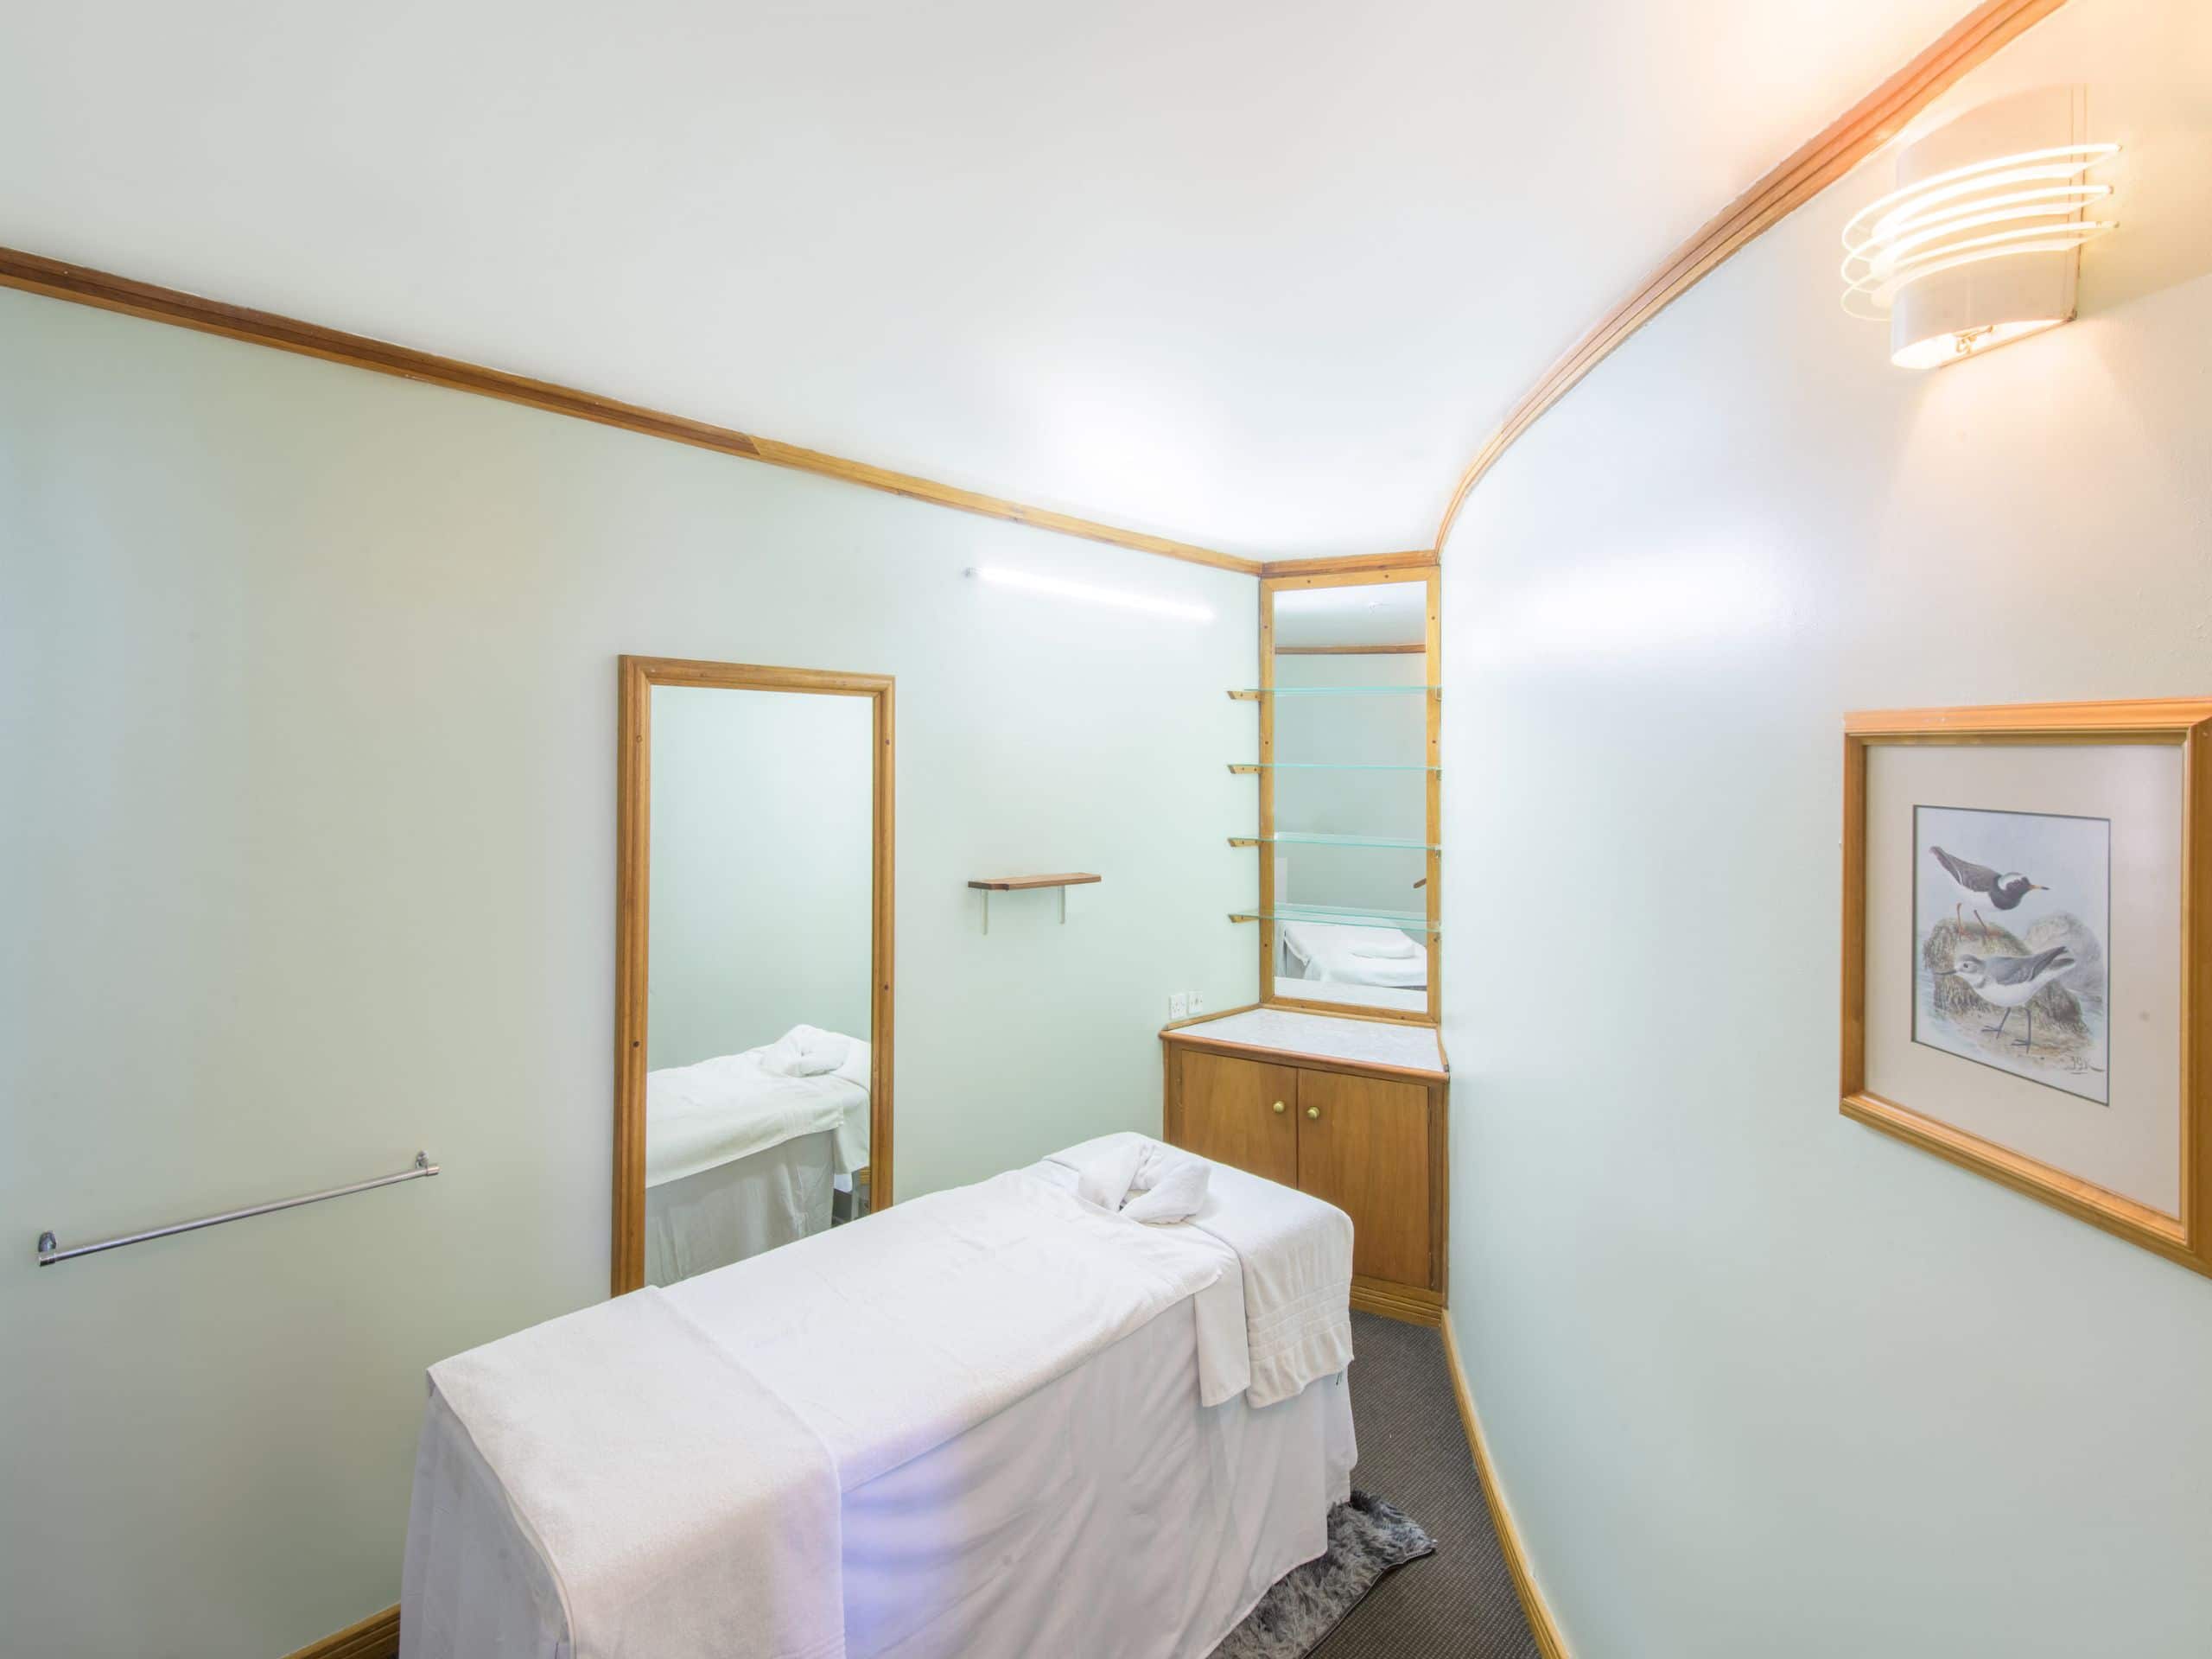 Spa Treatment room in Harare hotel featuring a massage bed and mirror